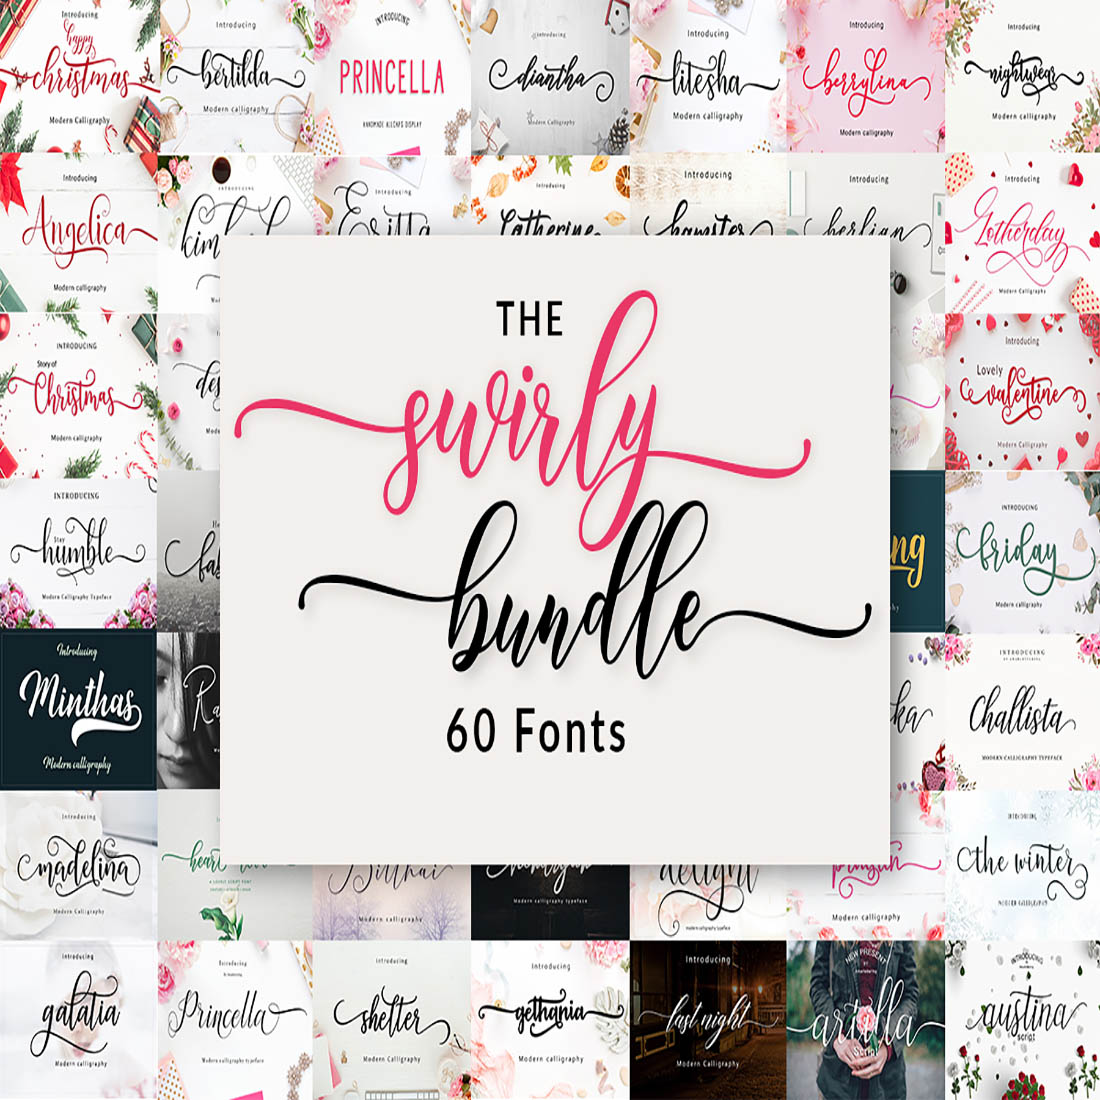 The Swirly Fonts Bundle preview image.